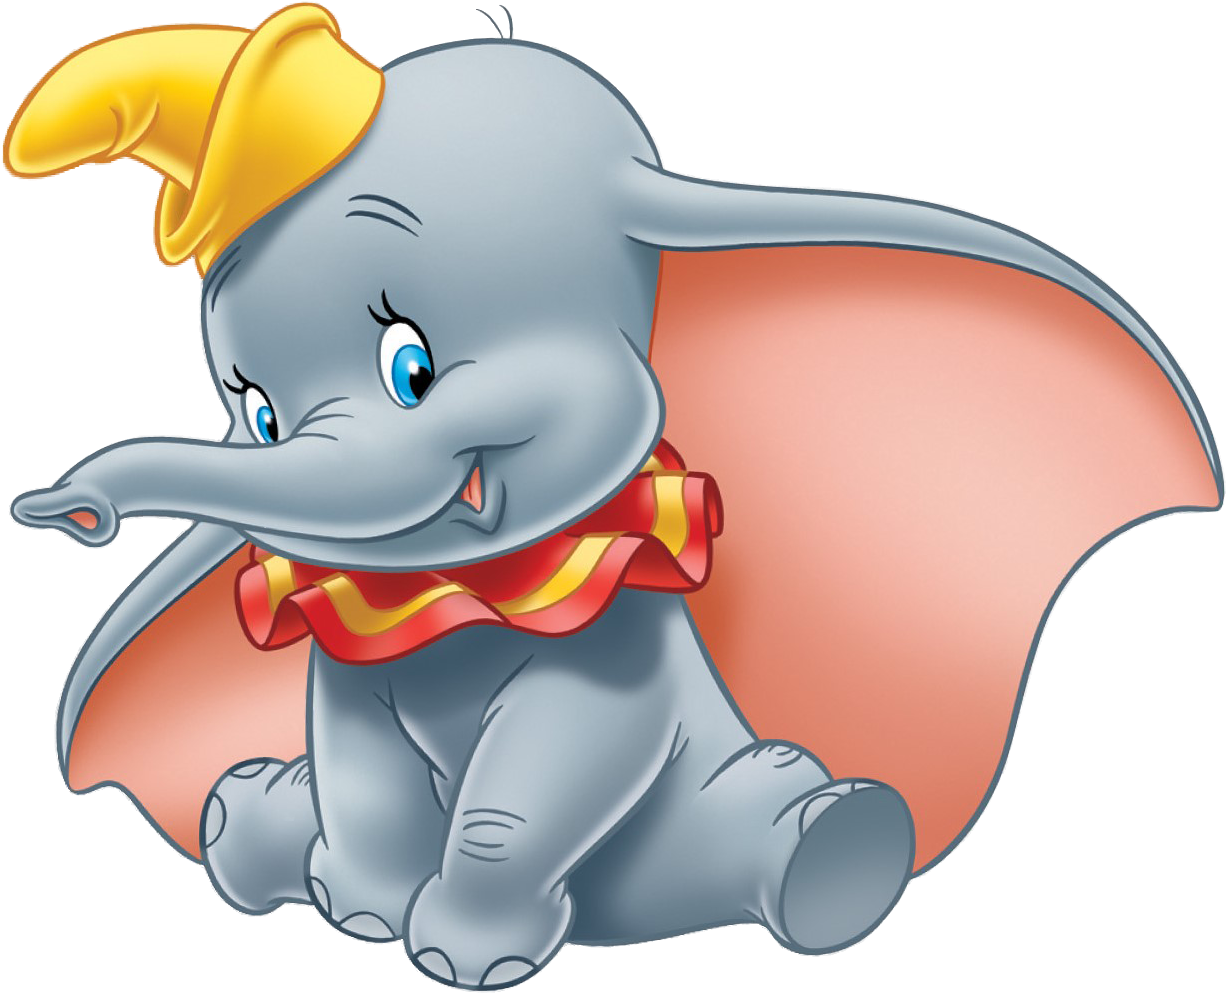 Download Disney Png Images - Dumbo Disney PNG Image with No ...